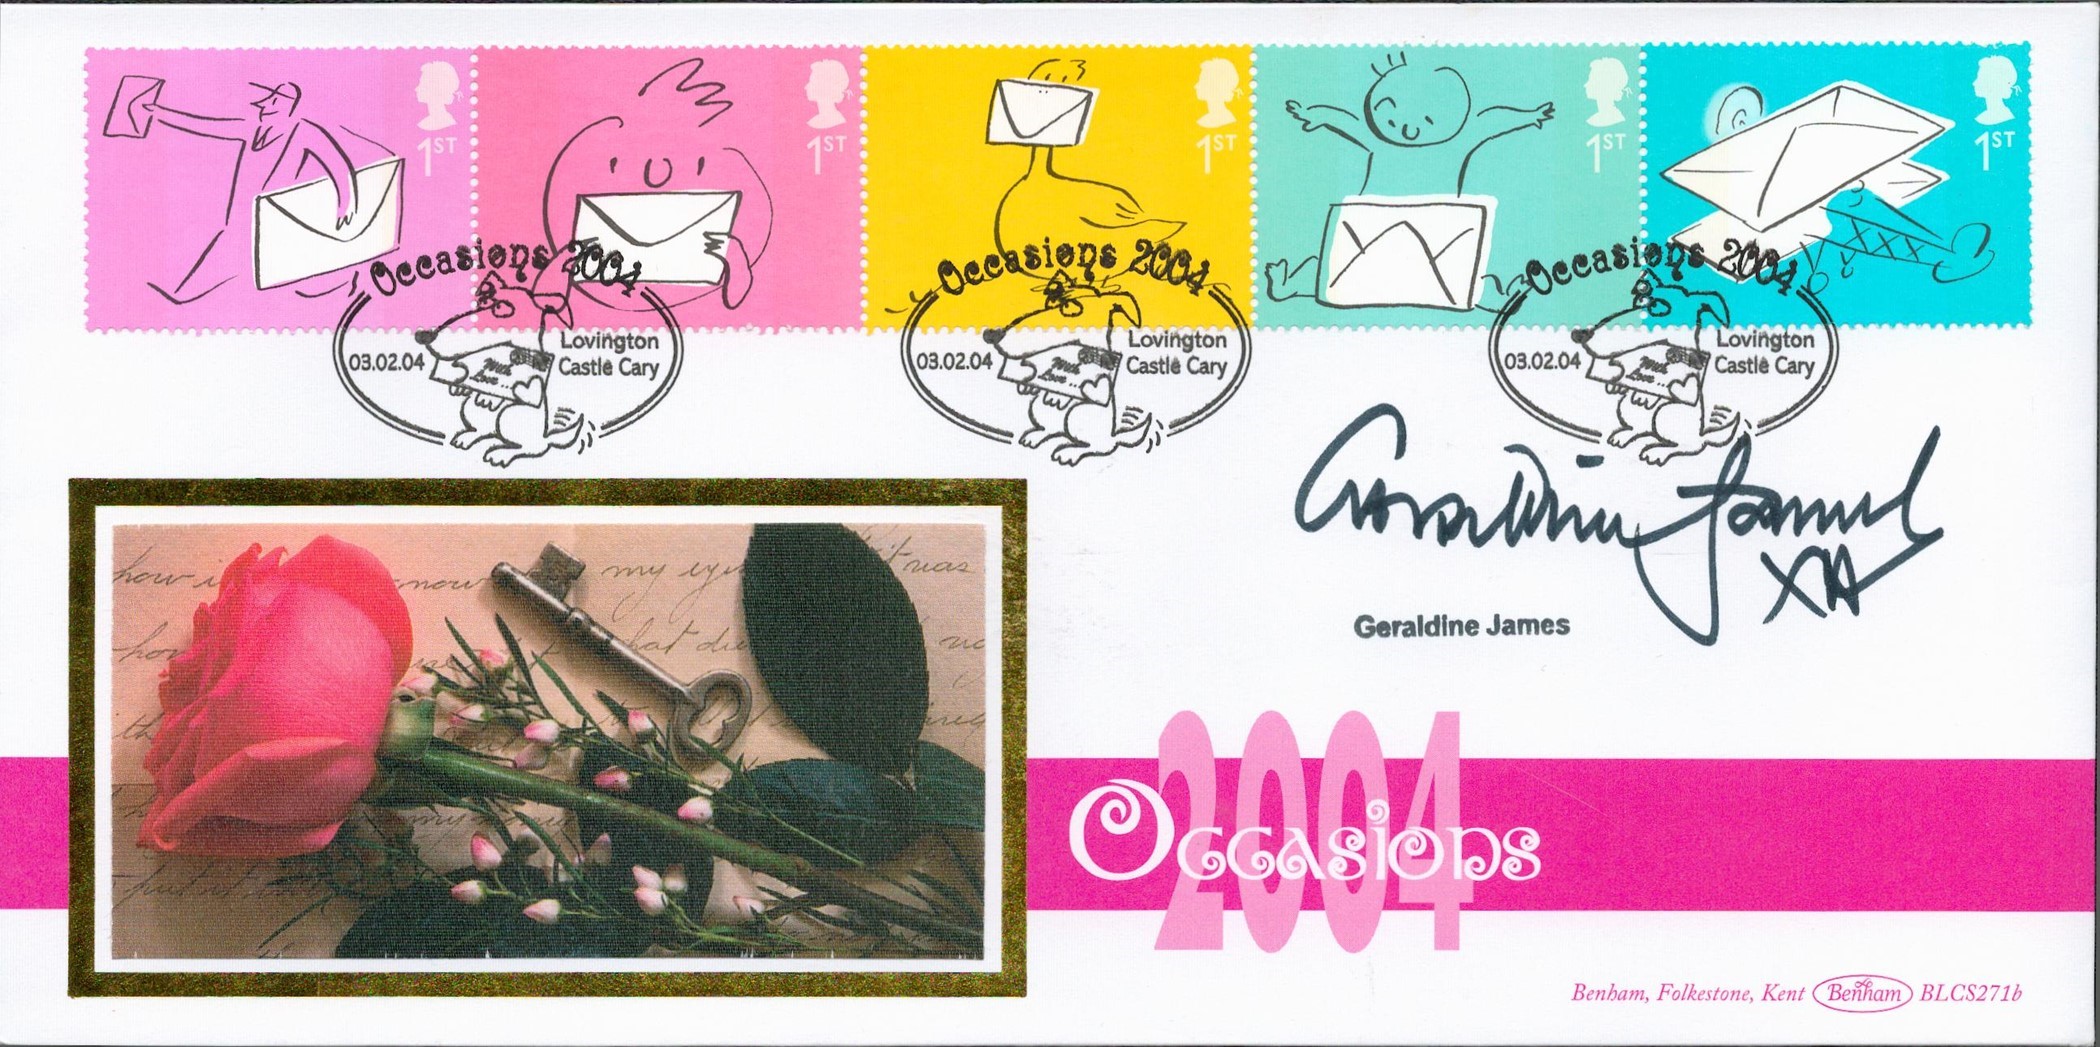 Geraldine James signed Occasions 2004 FDC. 3rd February 2004 Lovington Castle Cary. Good condition